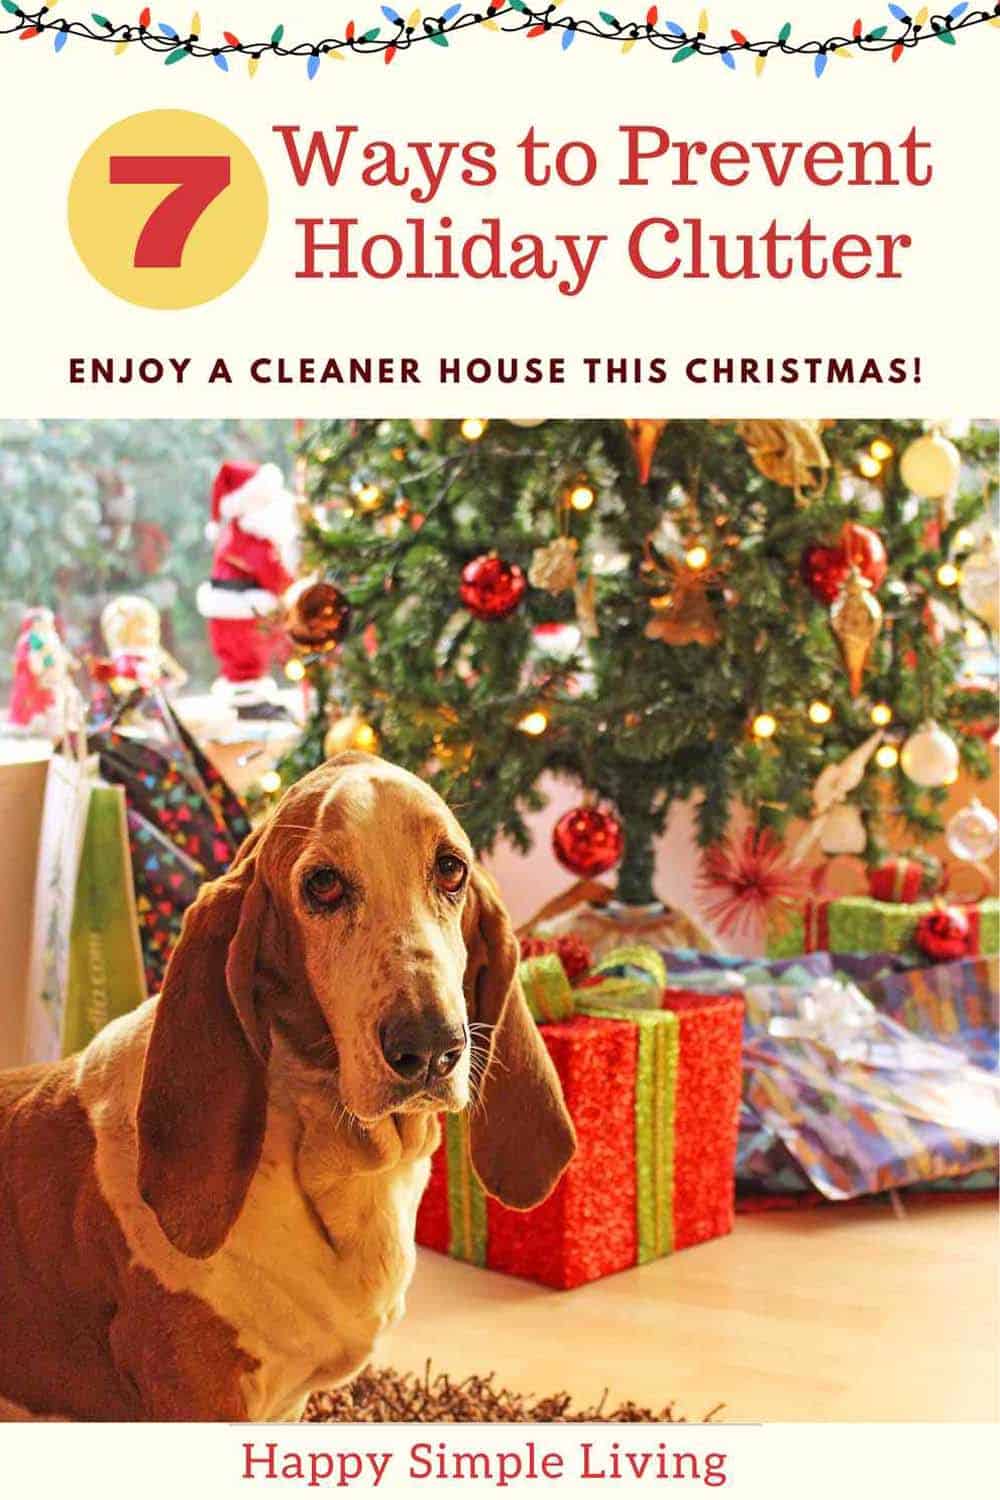 A sweet Basset hound with Christmas presents, decorations, and a tree.